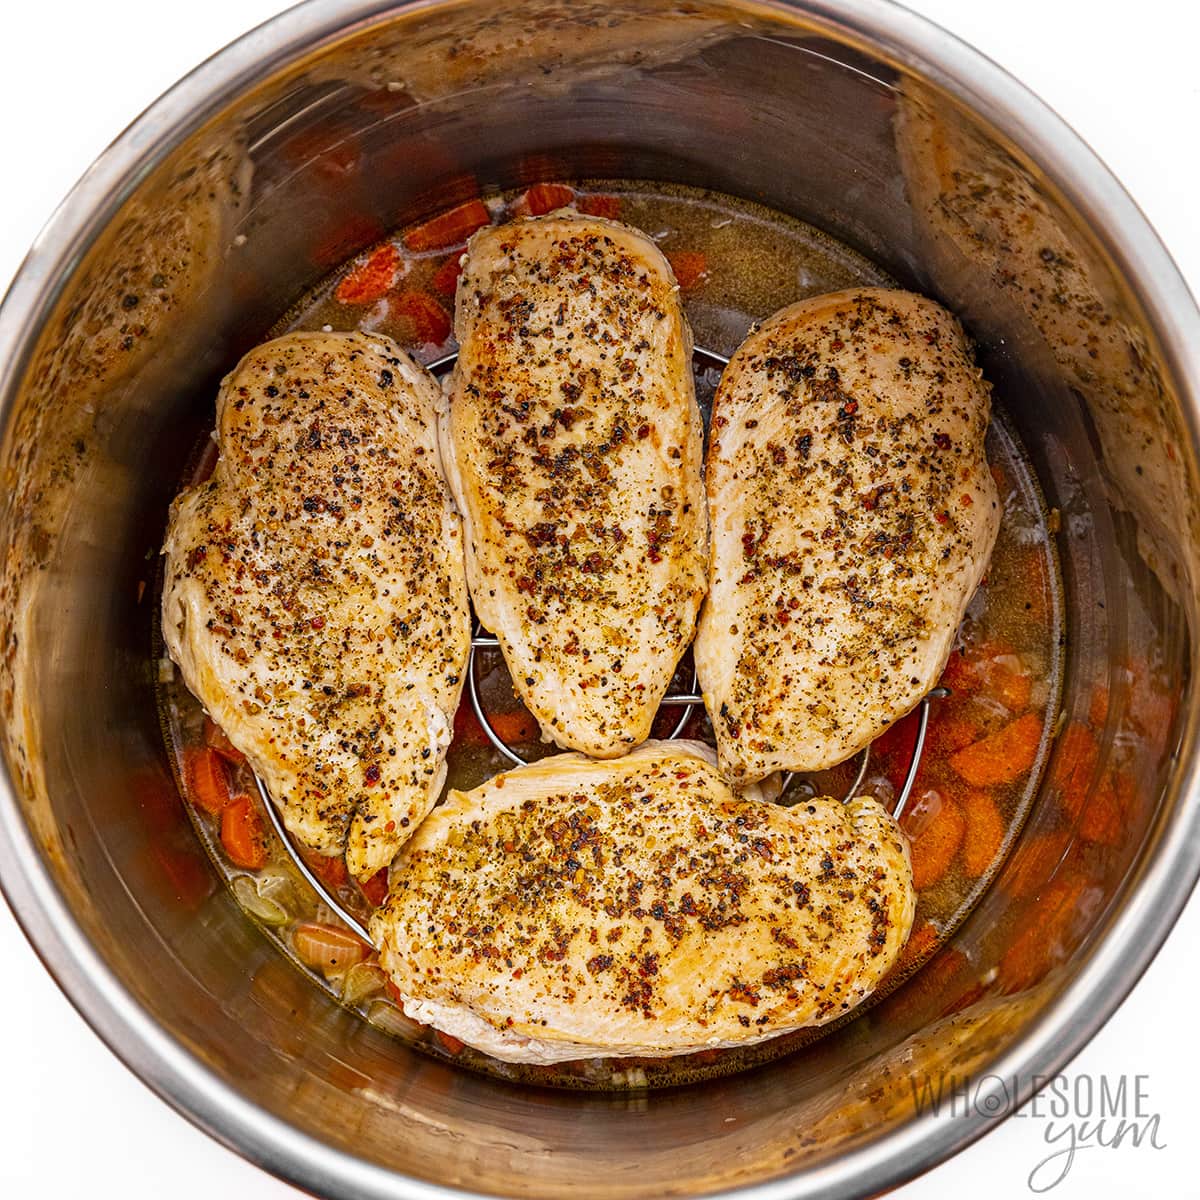 Seasoned chicken placed over rice and veggies in Instant Pot.